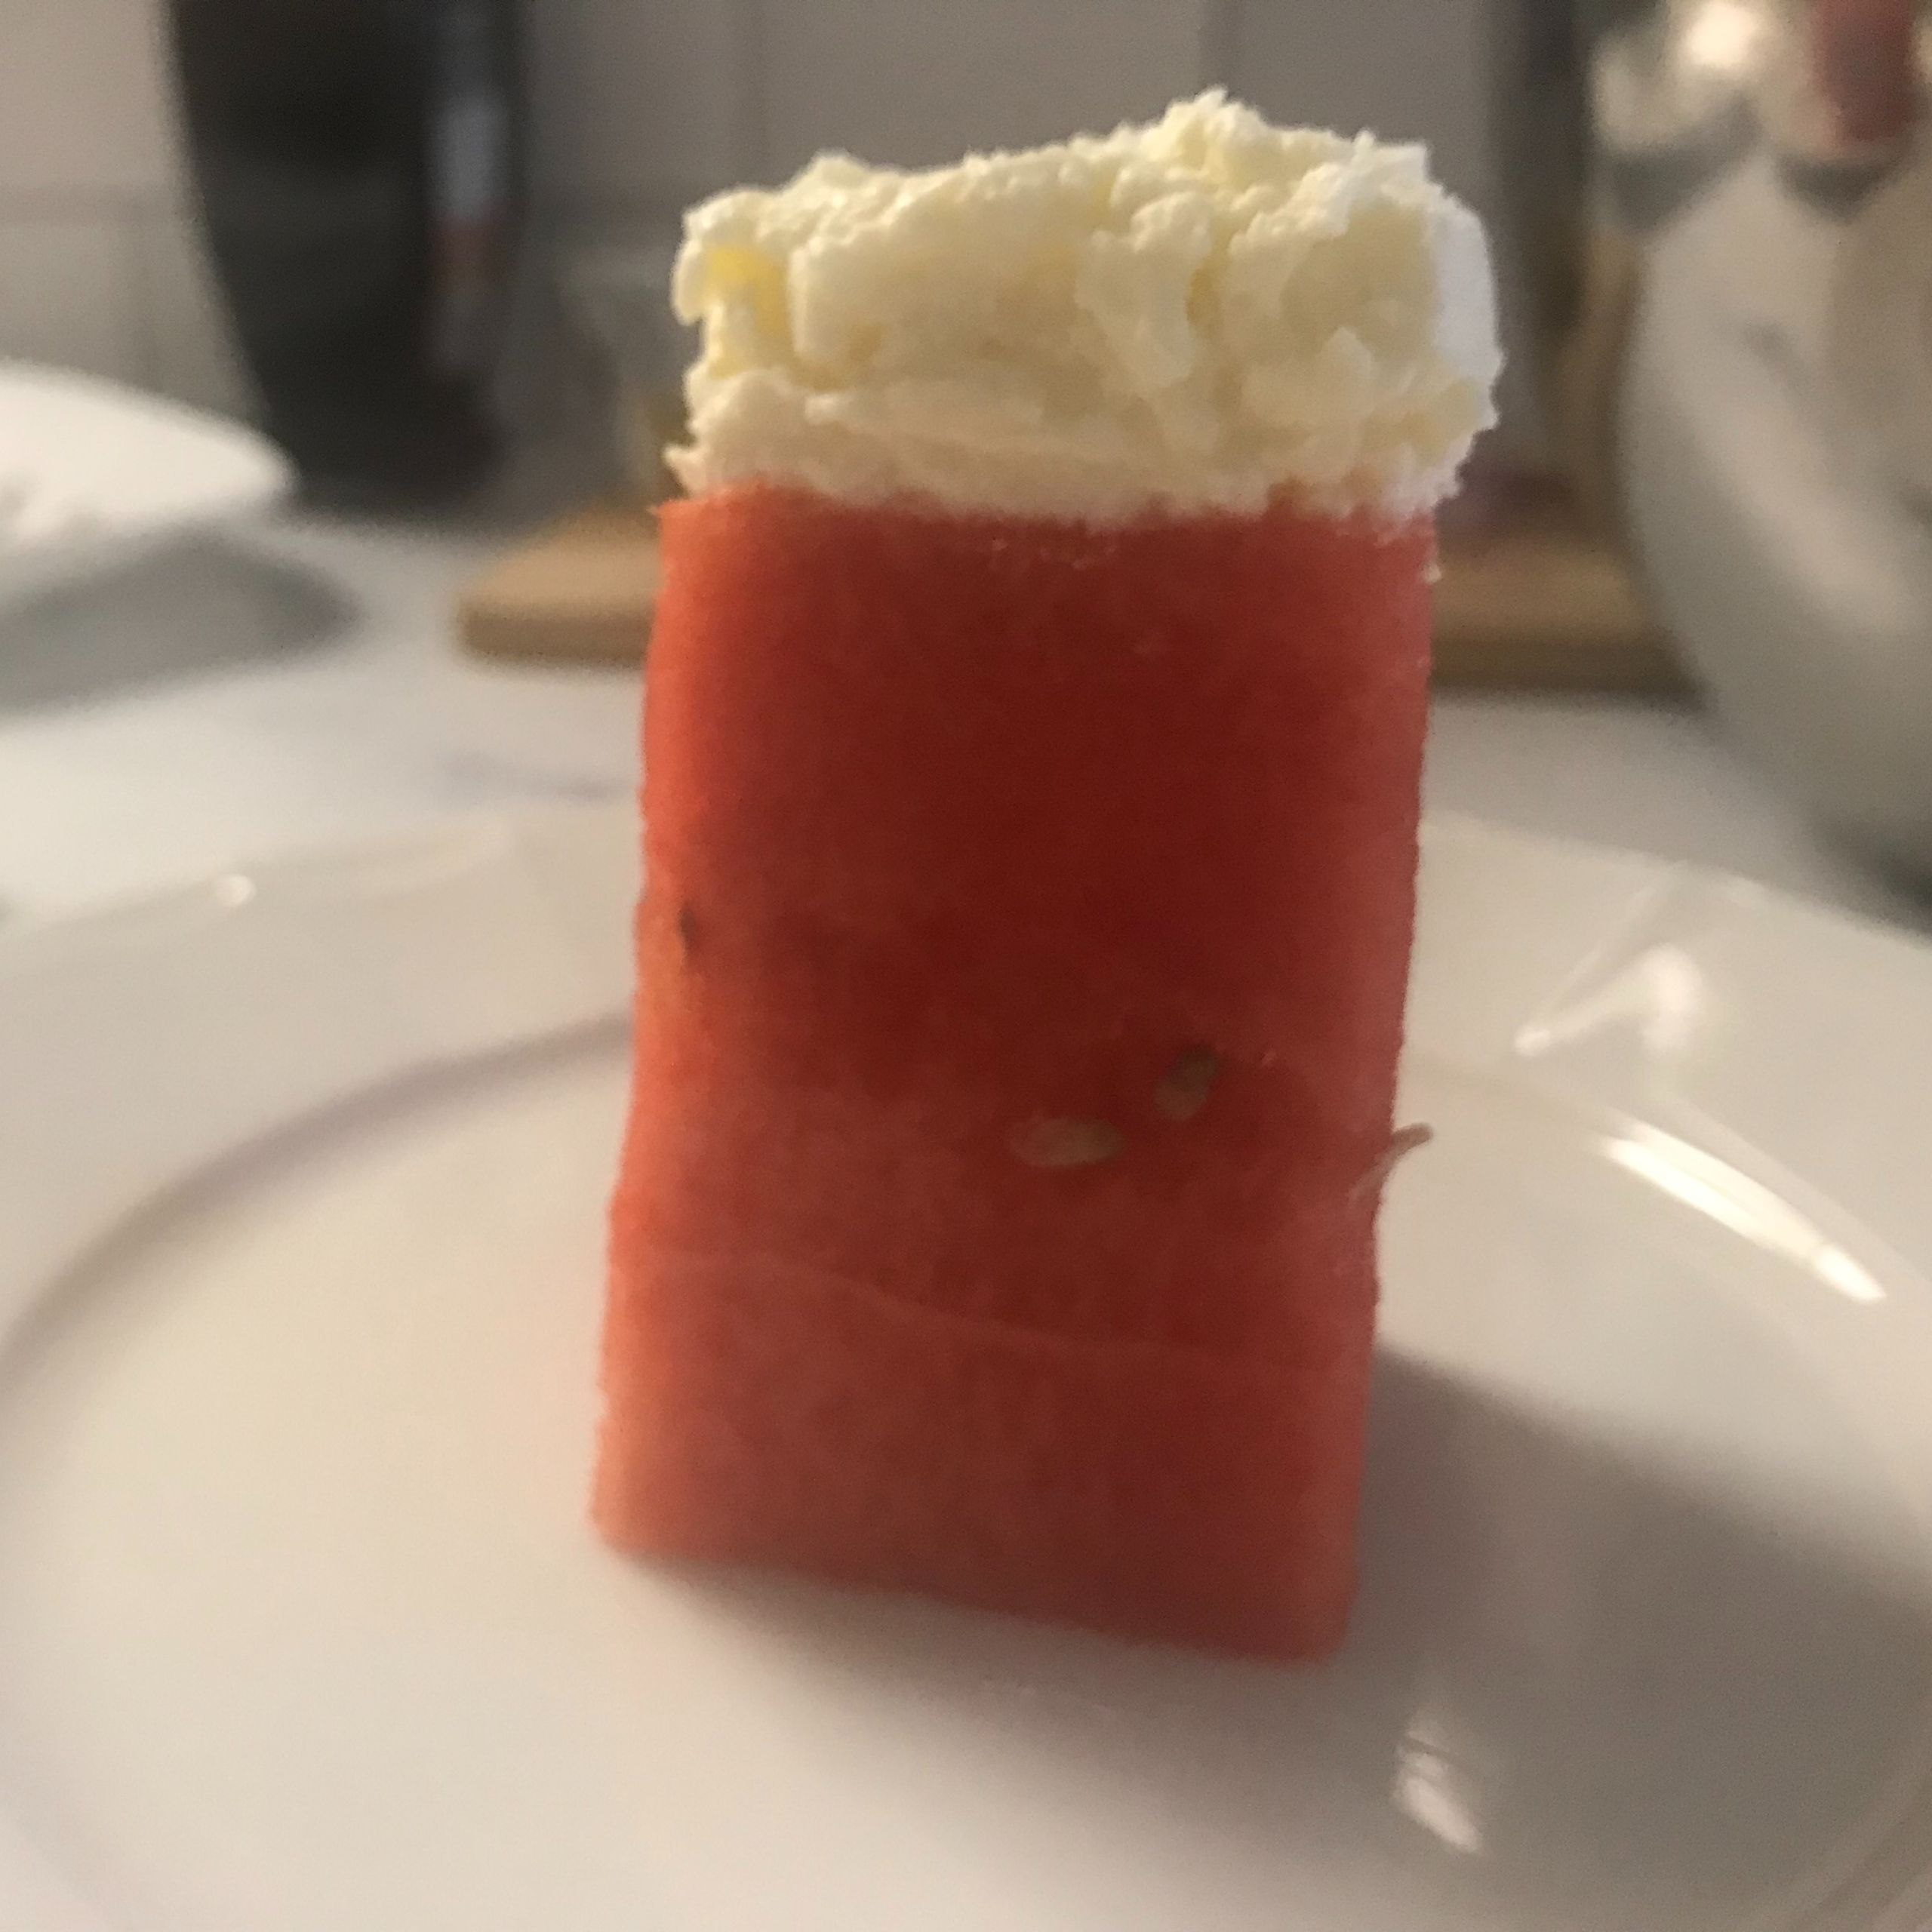 watermelon rectangle topped with whipped feta